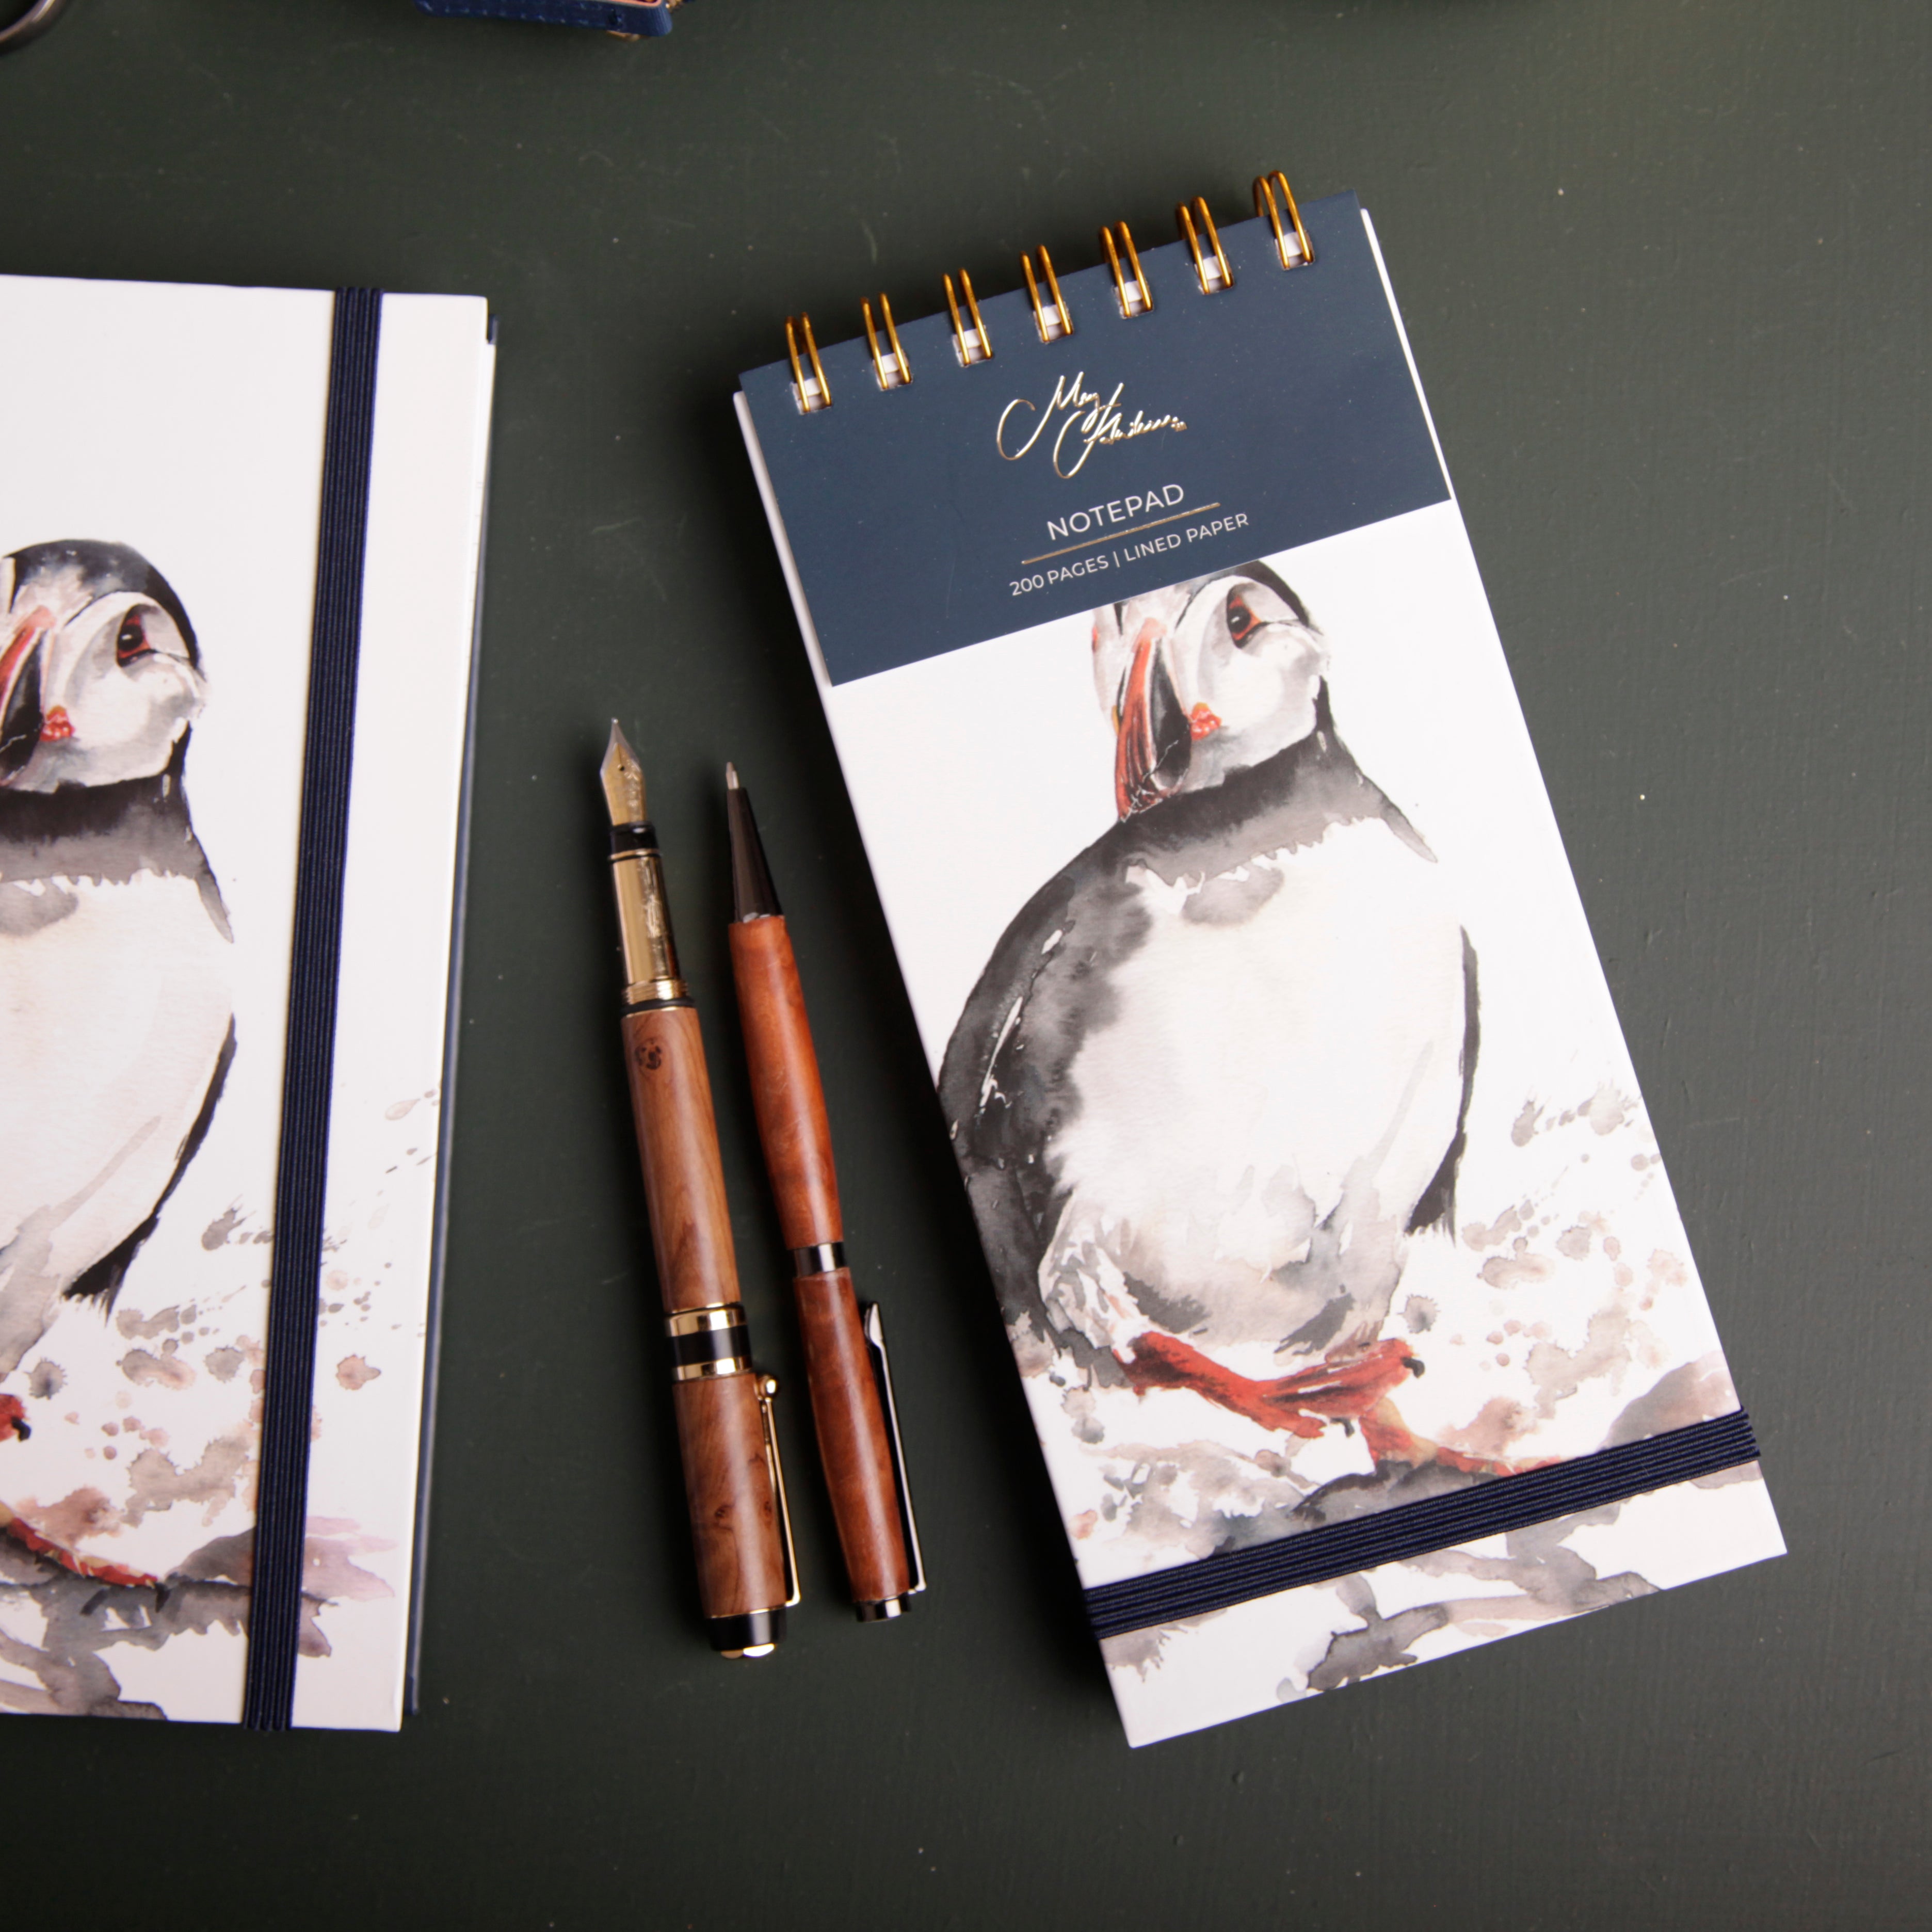 'The Coast' Puffin Watercolour Design Notepad